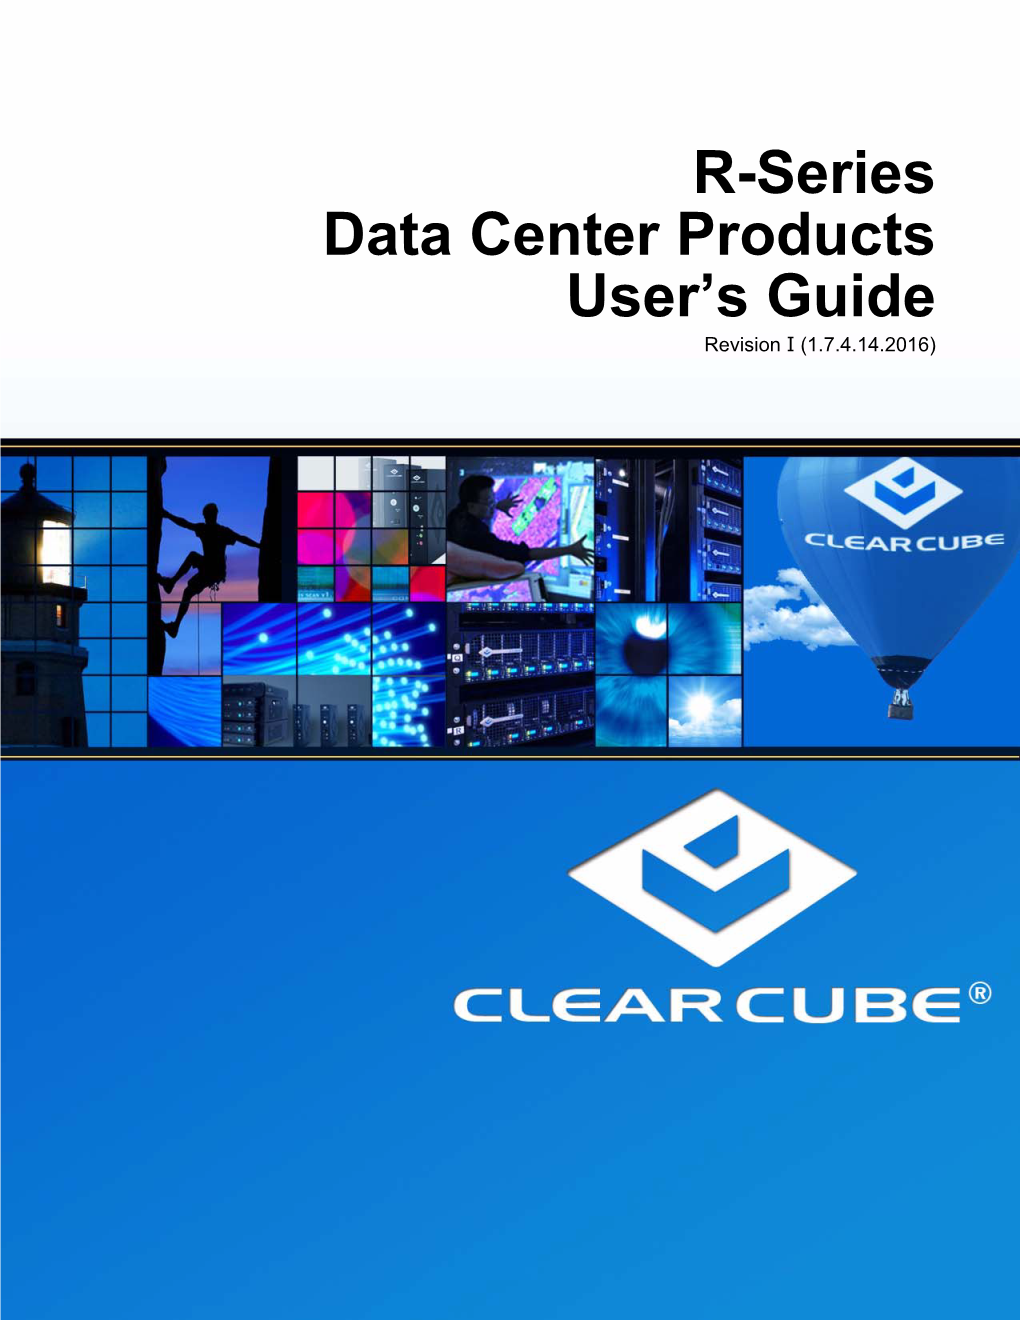 R-Series Data Center Products User's Guide